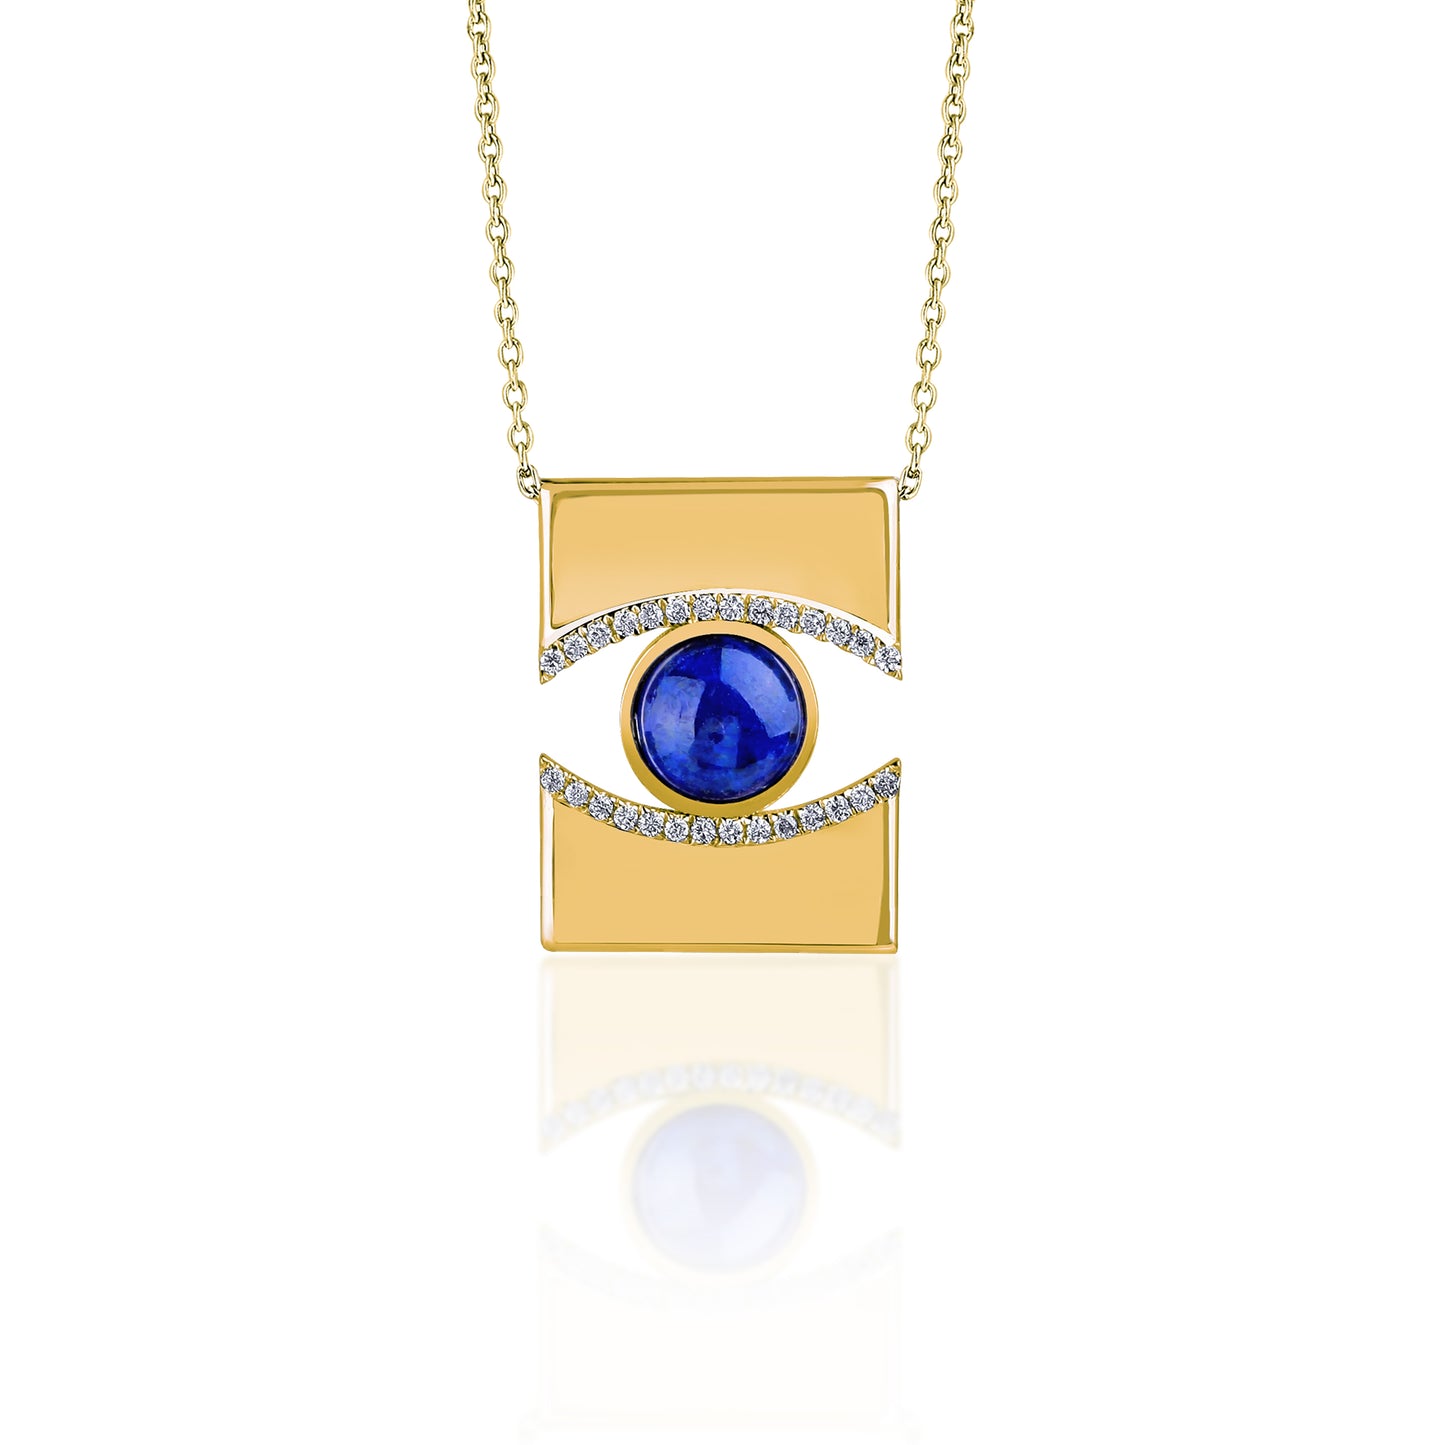 The Eye Necklace